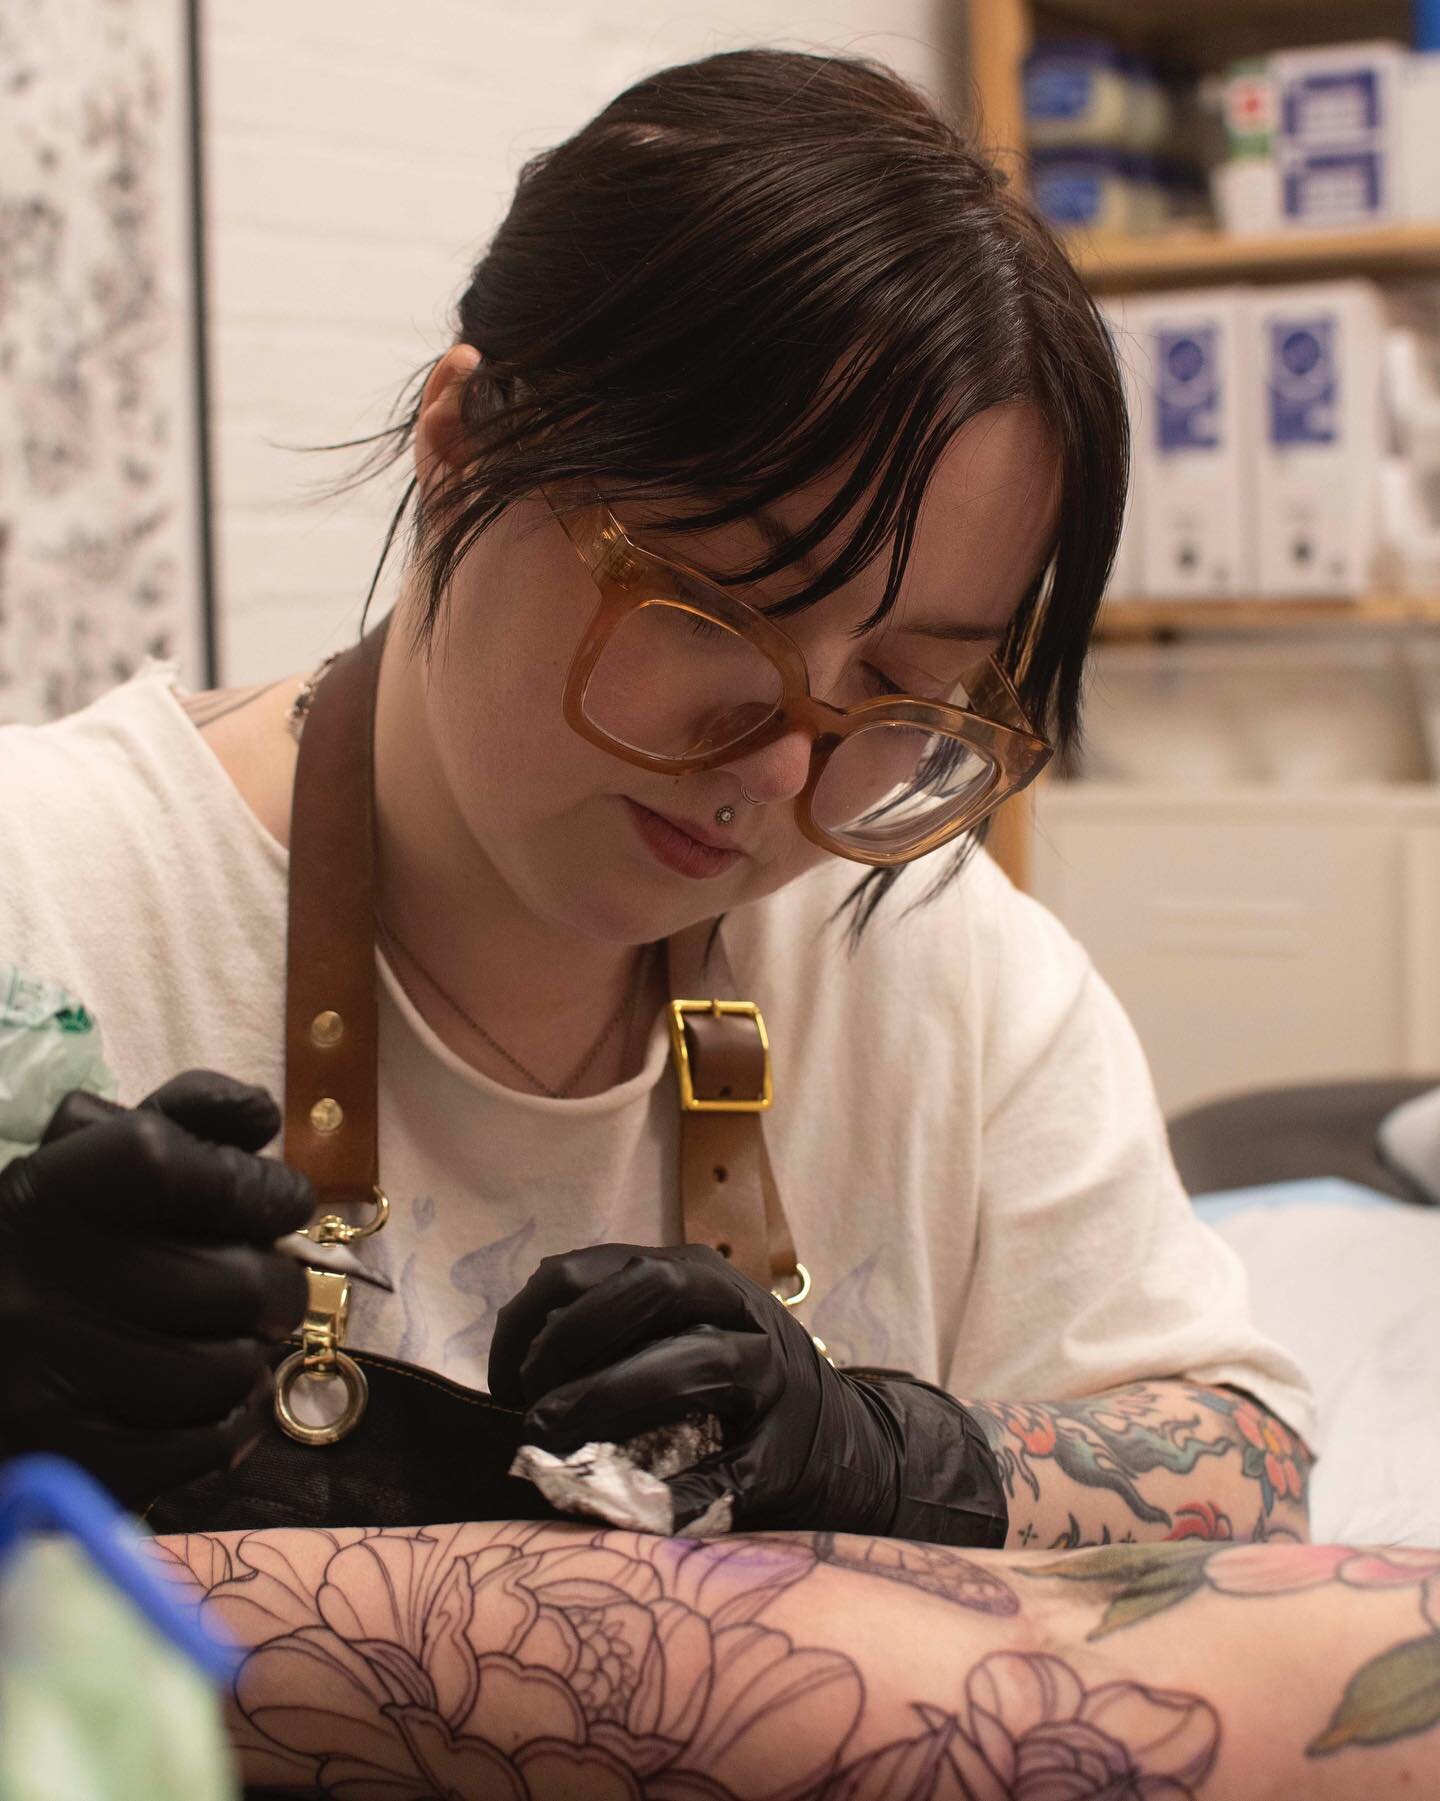 Behold, my terrible tattooing posture. 

Thank you for the photos @beck.arts sorry these got cropped by Instagram!